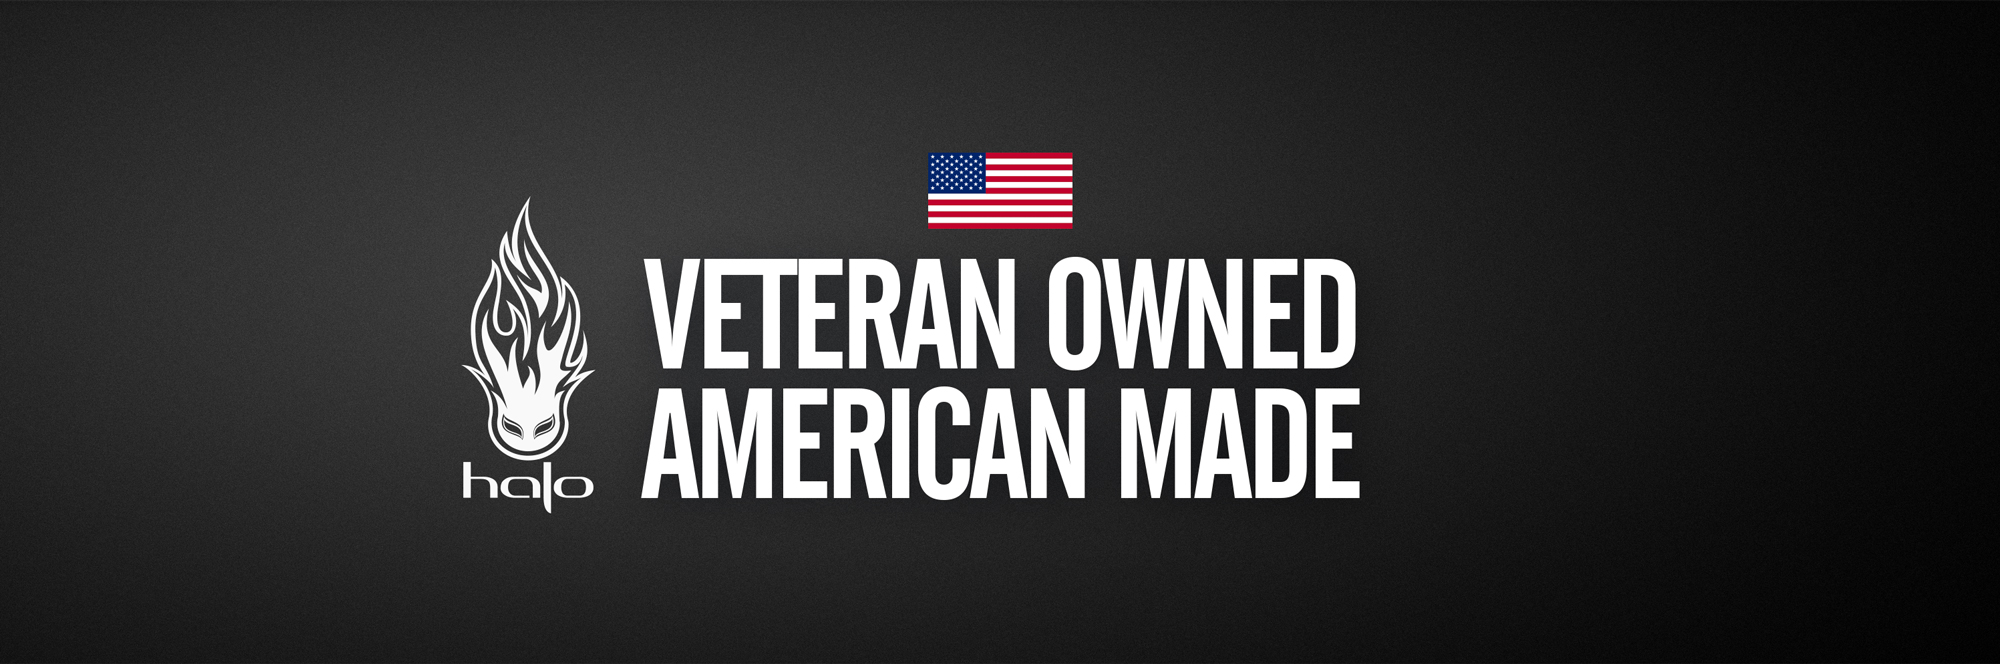 Halo Veteran Owned American Made